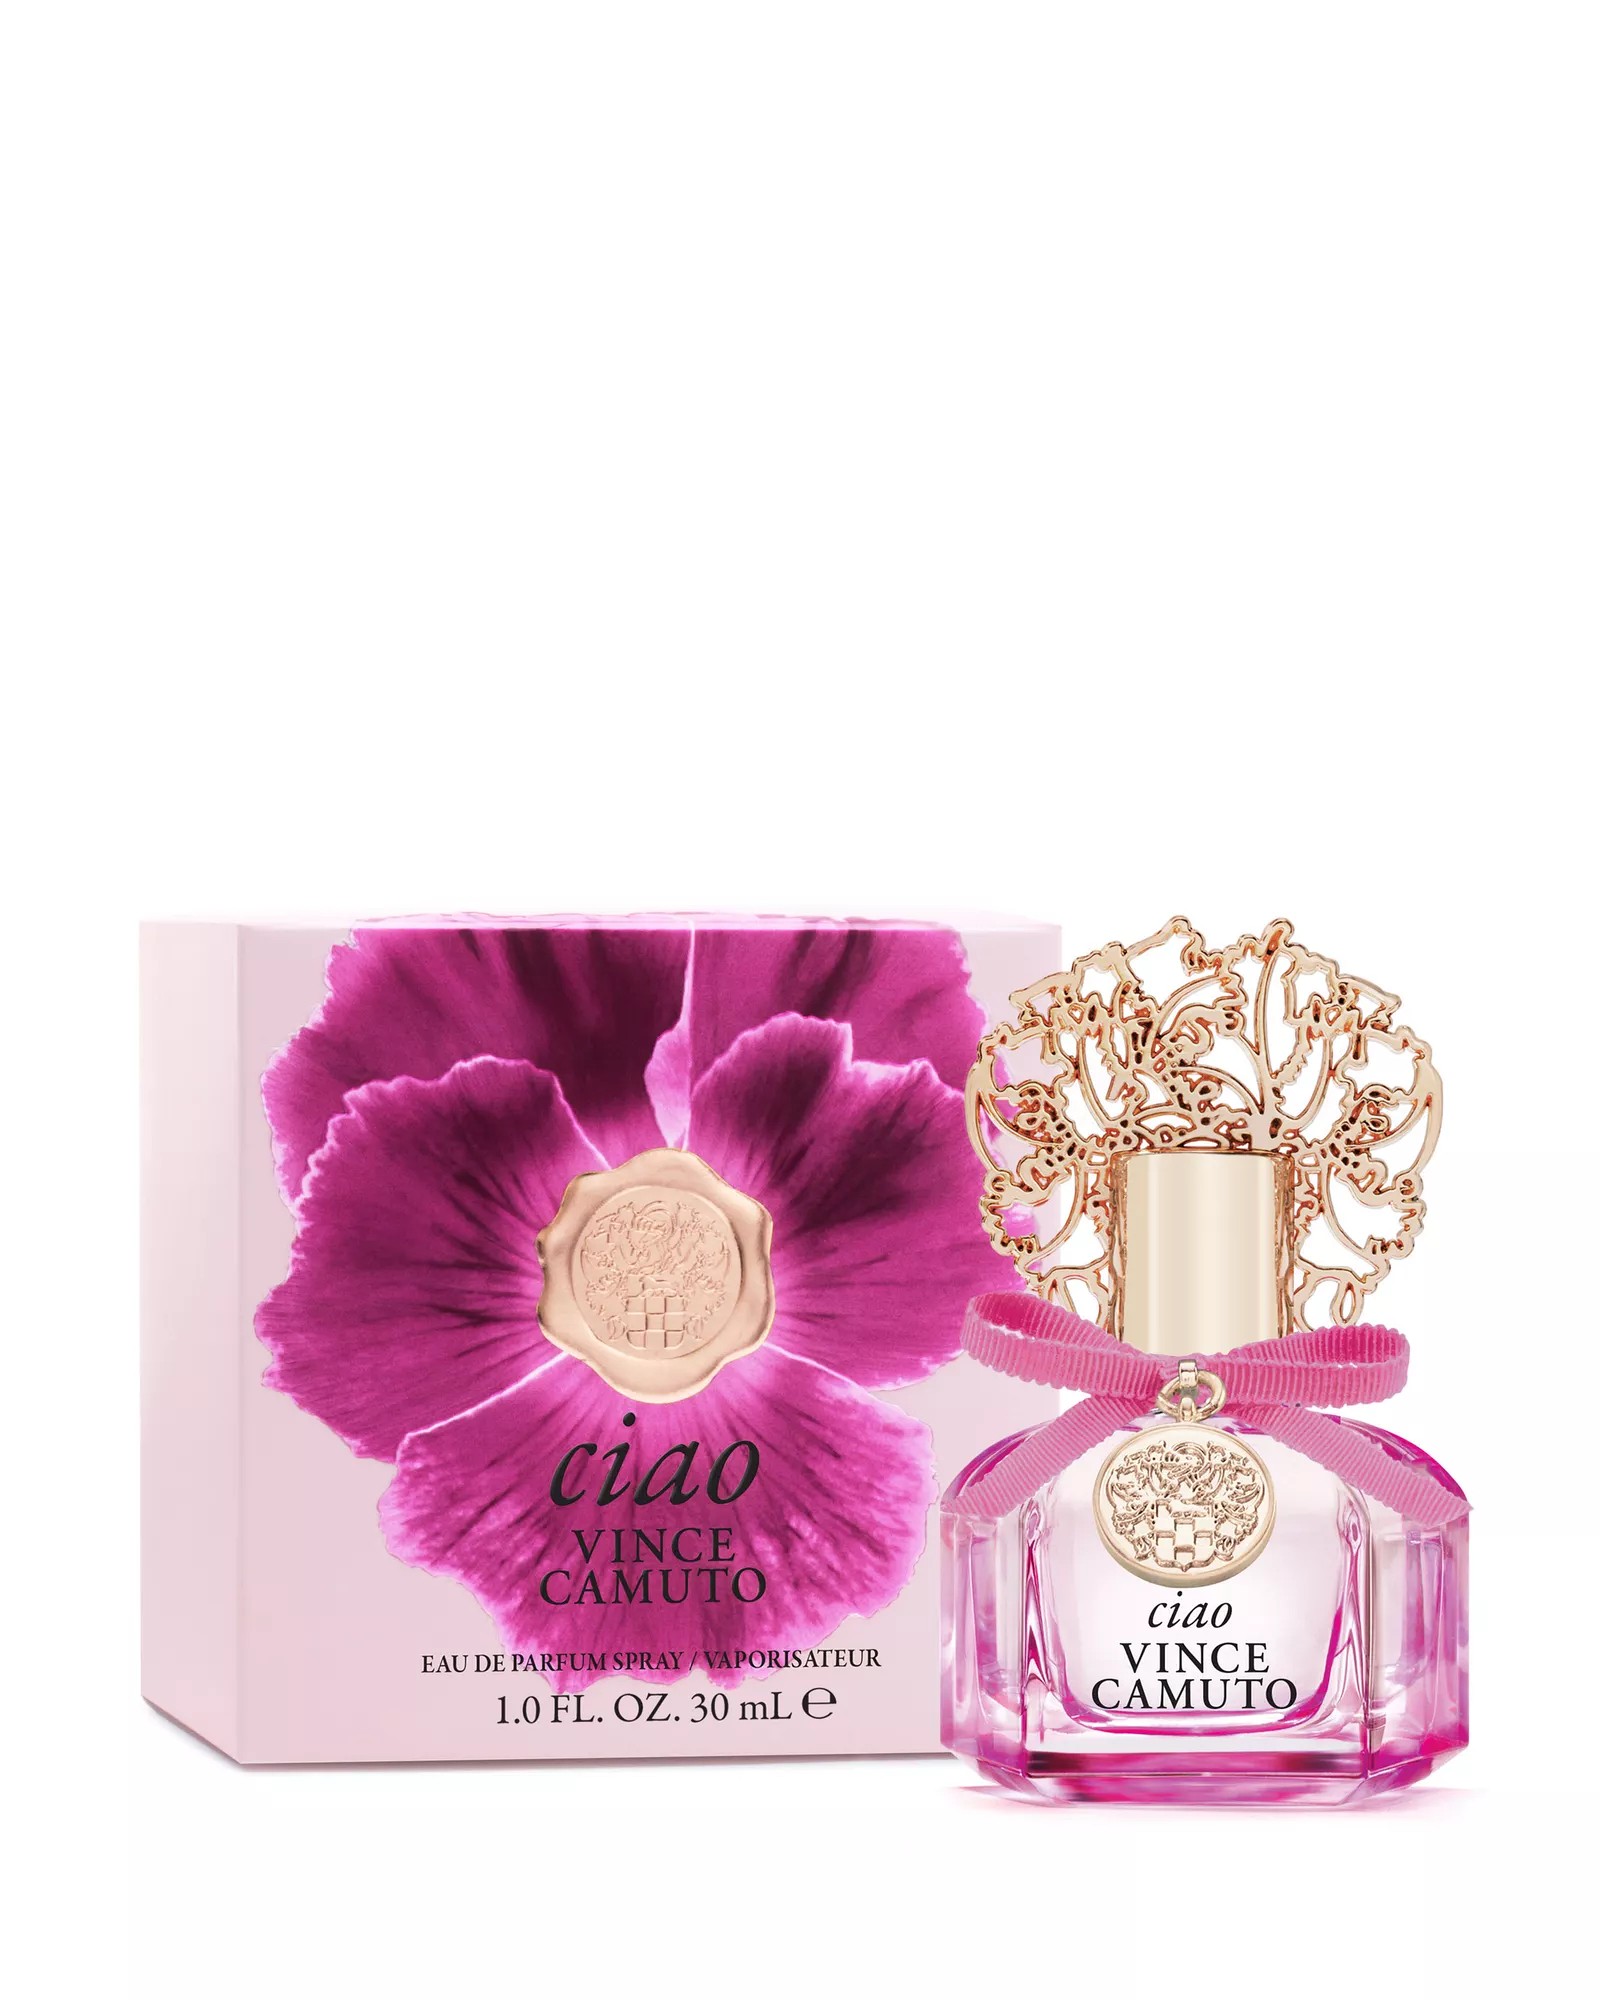 Vince Camuto Ciao by Vince Camuto 3.4 oz EDP Perfume for Women No